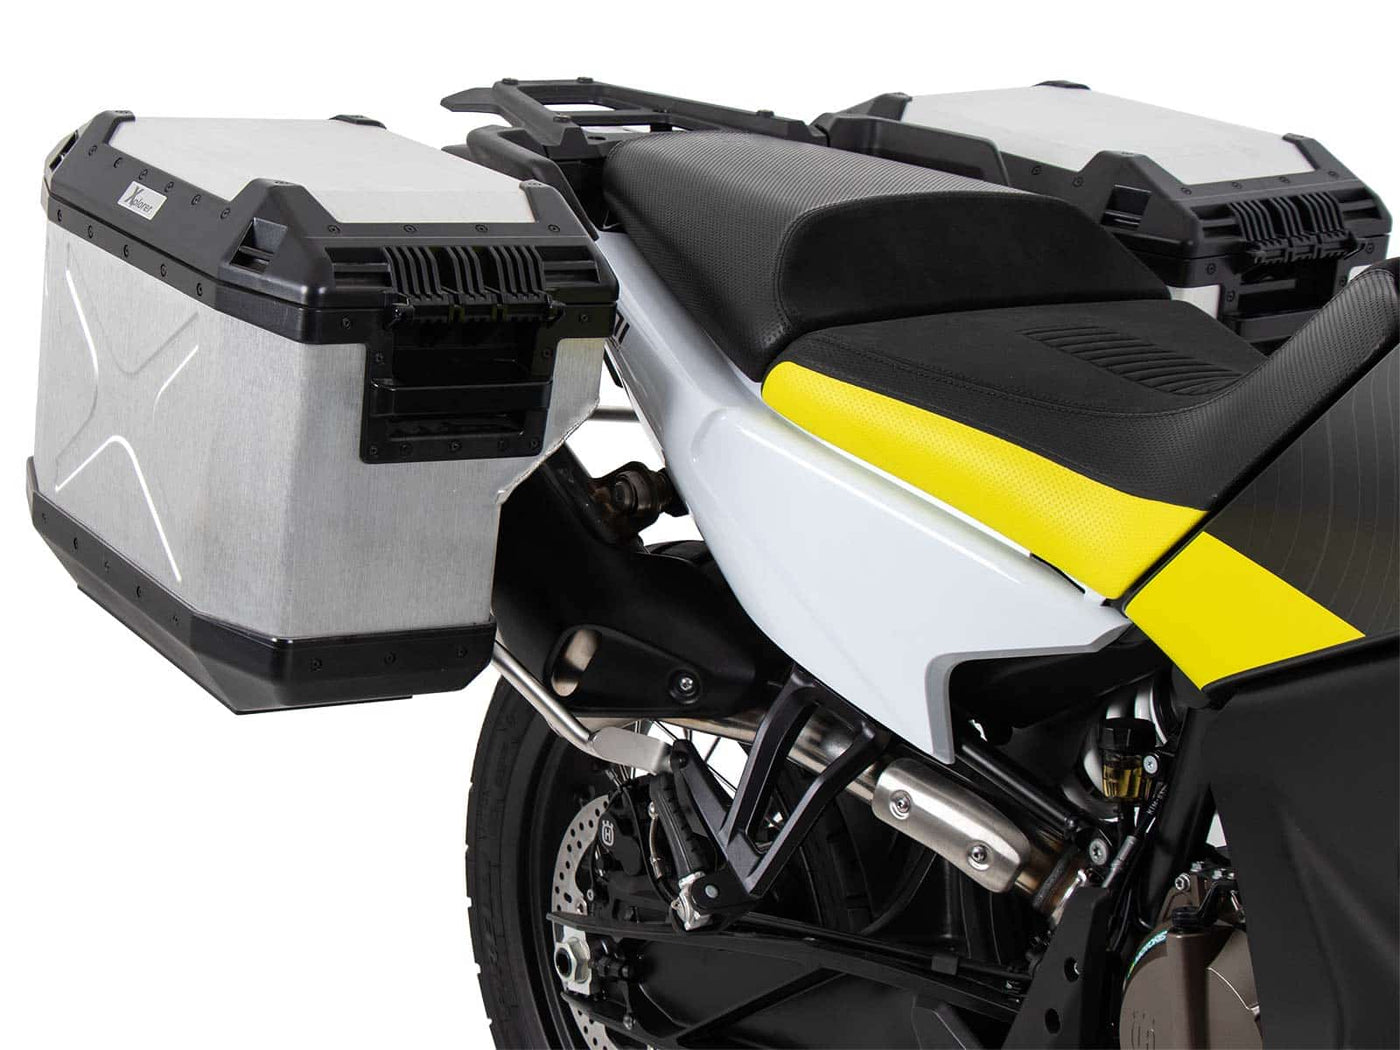 SideCarrier Cutout Stainless Steel incl. XPLORER Silver Sideboxes for KTM 790 / 890 Adv & HUSQVARNA Norden 901